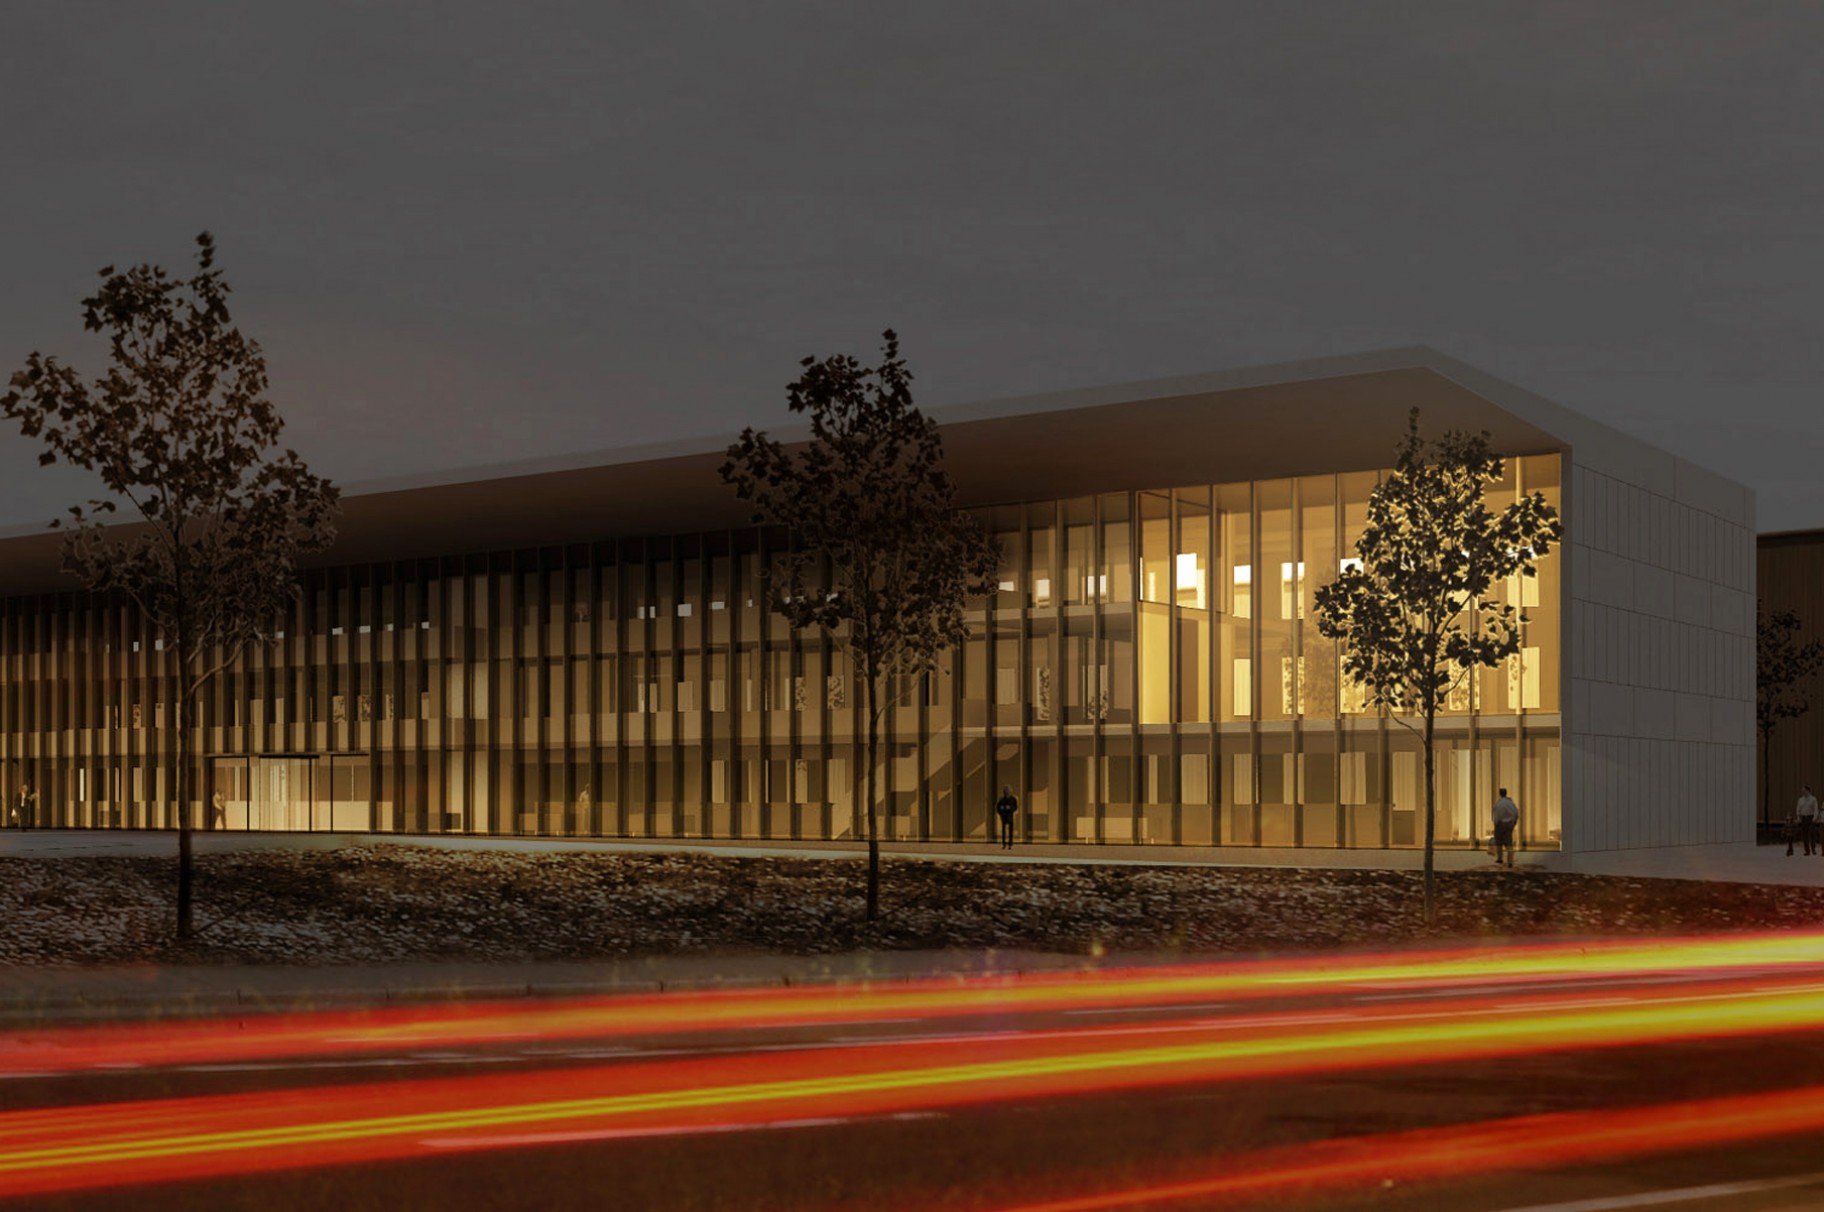 Competition Administratief Centrum Oostkamp submitted